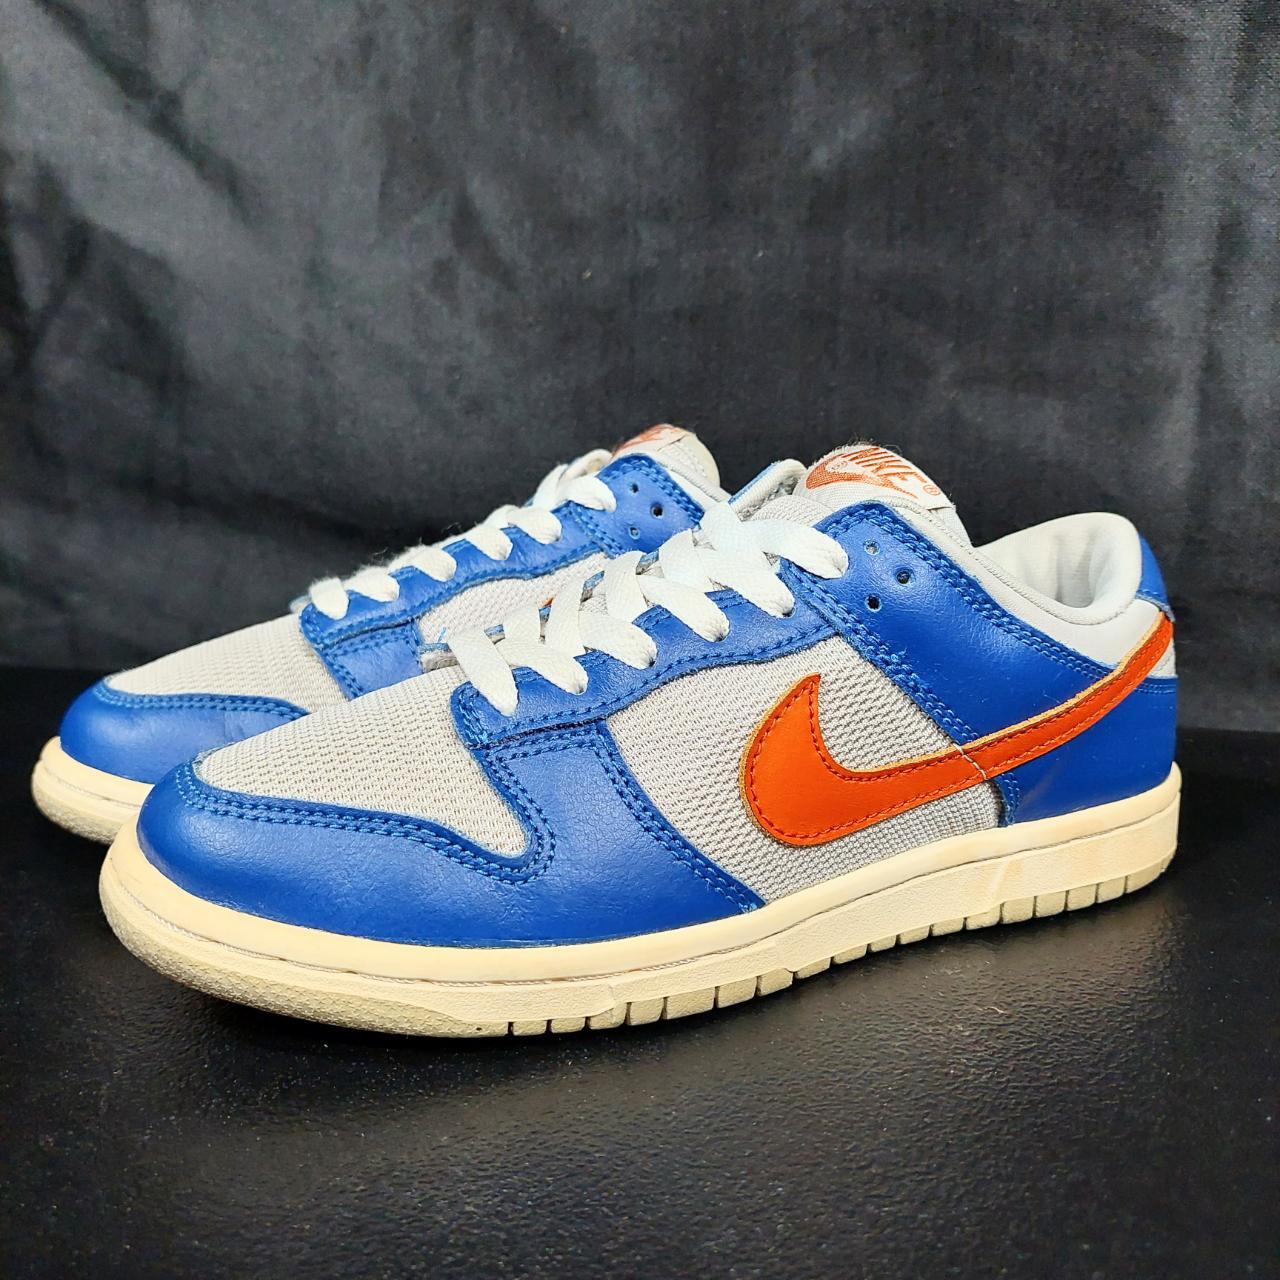 Knicks: Nike Dunk Low Knicks shoes: Where to get, price, and more